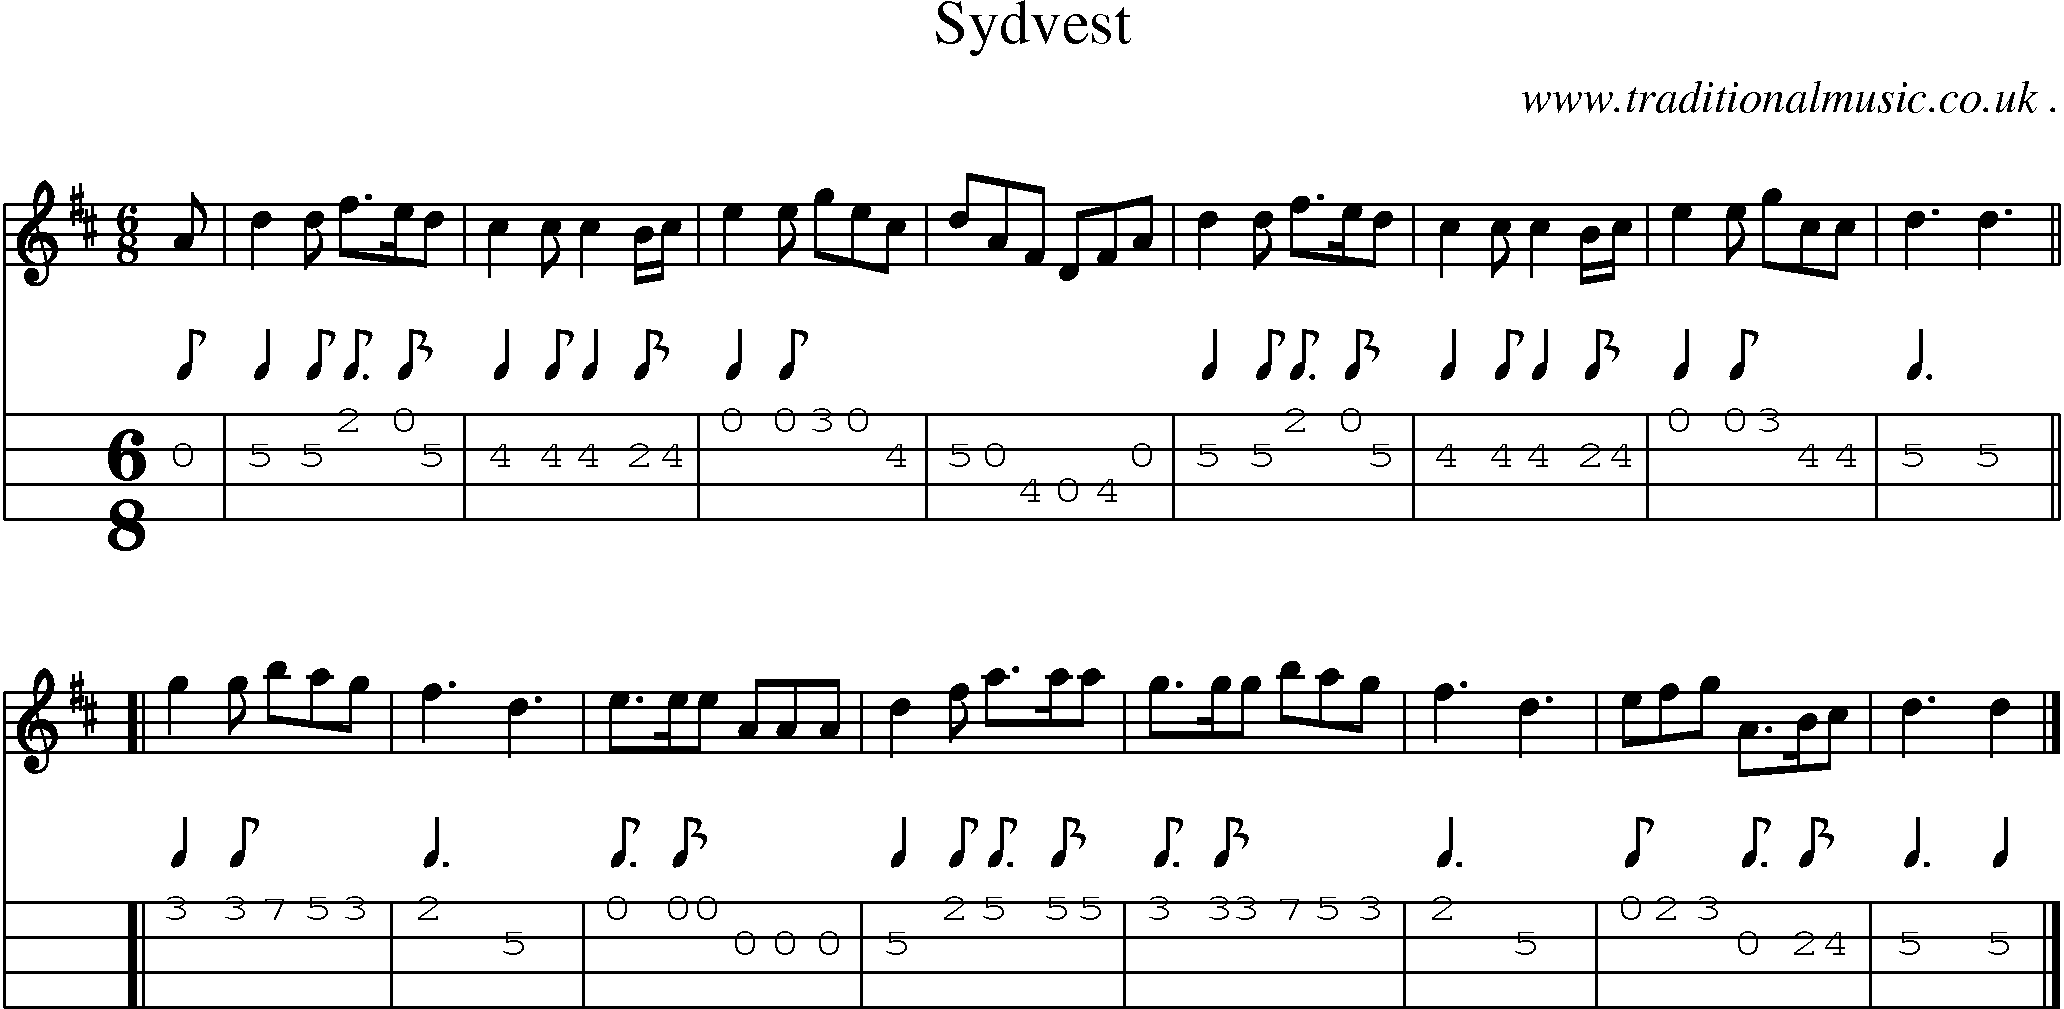 Sheet-music  score, Chords and Mandolin Tabs for Sydvest